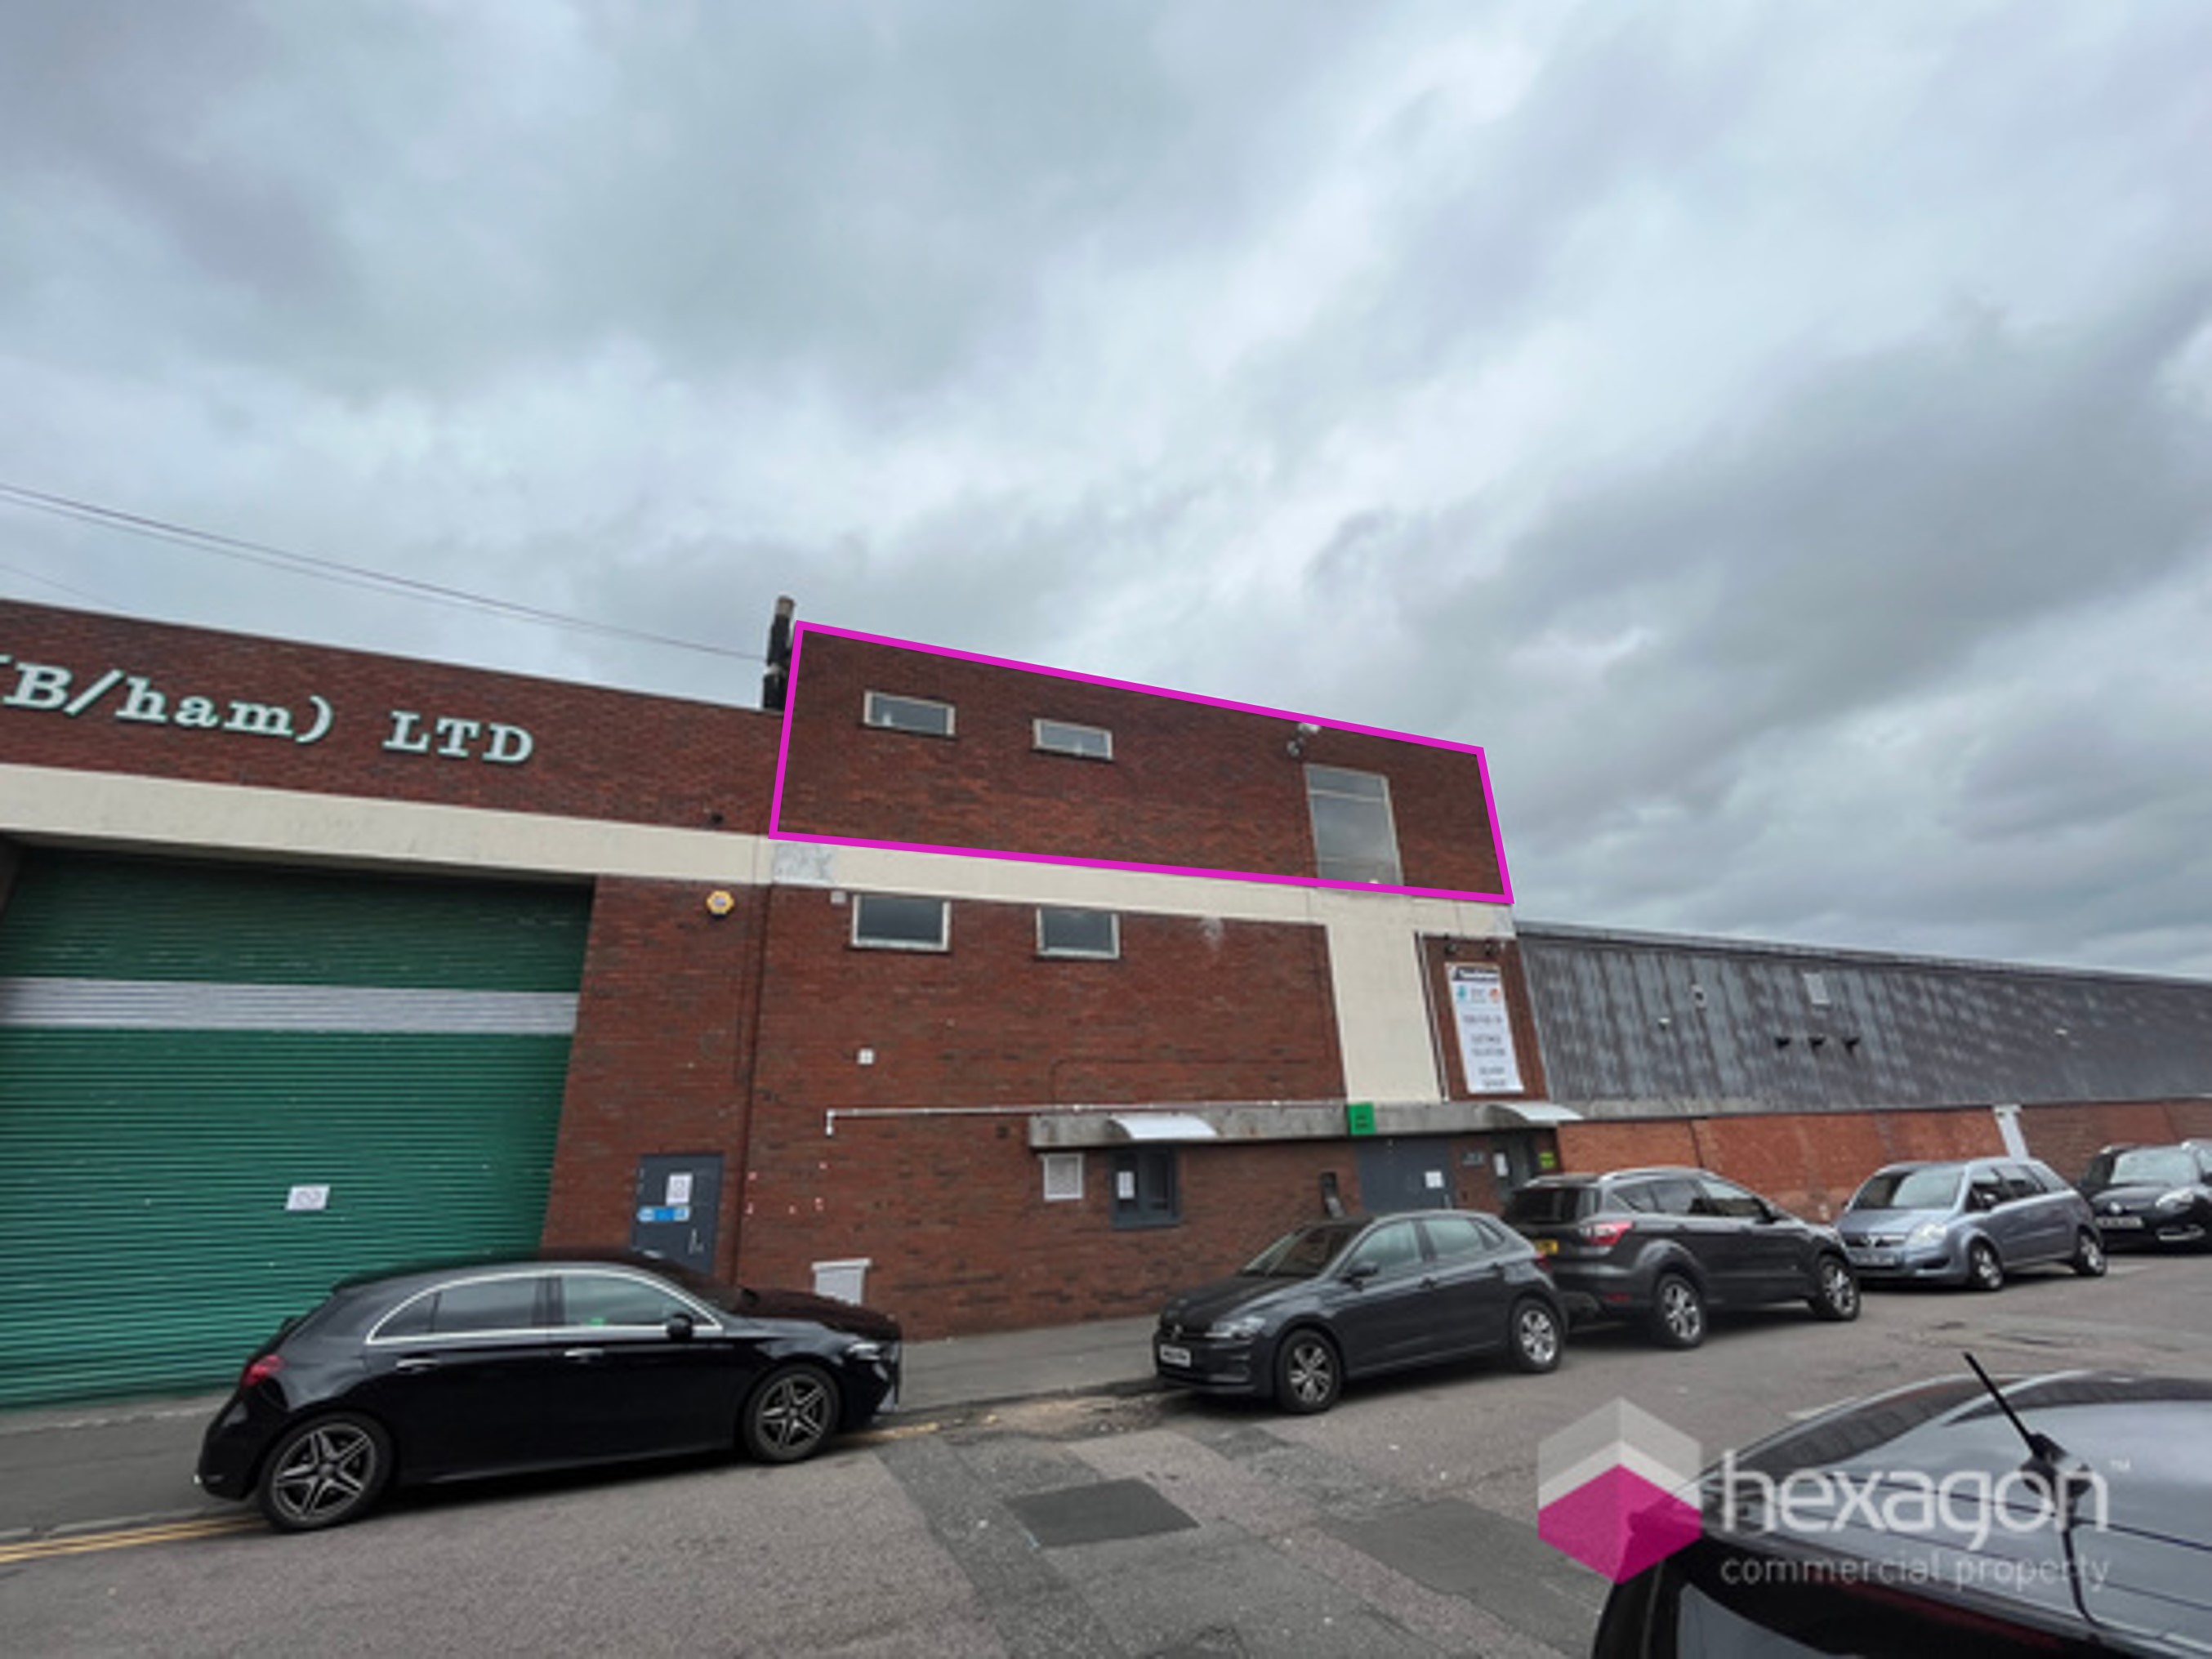 Retail Property (High Street) for rent in Birmingham. From Hexagon Commercial Property